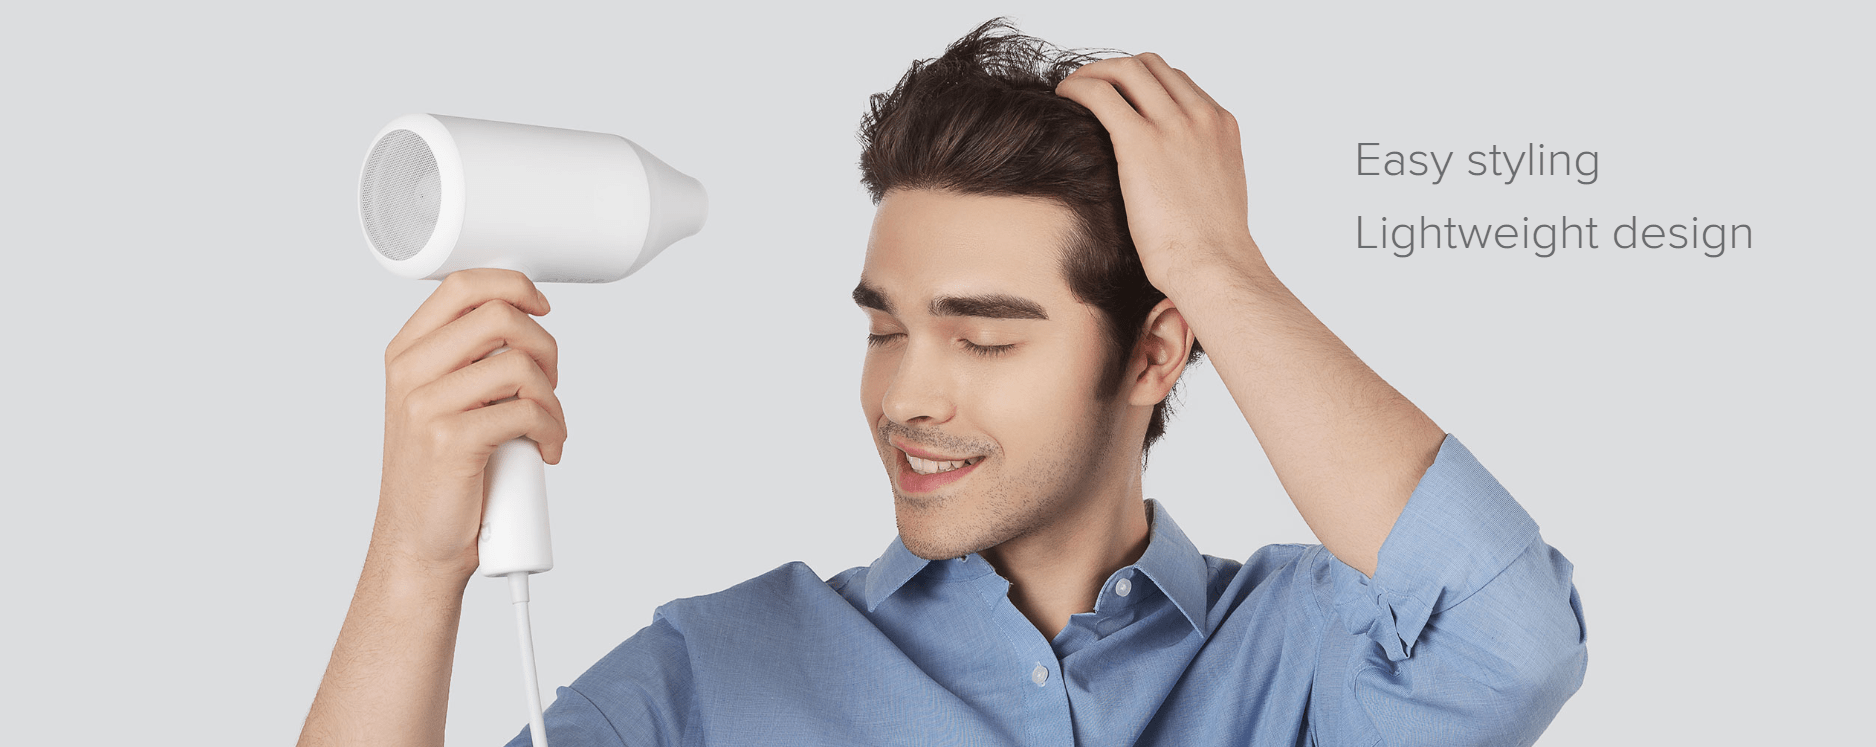 H10 Xiaomi &Lt;Div Class=&Quot;Text-Content Content-Left&Quot;&Gt; &Lt;Div Class=&Quot;Mj-Slogan&Quot;&Gt;Drys Rapidly And Prevents Moisture Loss To Protect Your Hair&Lt;/Div&Gt; &Lt;Div Class=&Quot;Mj-Keyword&Quot;&Gt;Rapid Air Flow, Protects With Water Ions丨Ntc Smart Temperature Control With Alternating Hot And Cold Air丨Magnetic Nozzle Rotates 360°&Lt;/Div&Gt; &Lt;Div Class=&Quot;Price J_Xmproprice&Quot;&Gt;&Lt;/Div&Gt; &Lt;/Div&Gt; Https://Www.youtube.com/Watch?V=Mxekoepbrem Mi Ionic Hair Dryer 1800W - White Mi Ionic Hair Dryer 1800W - White